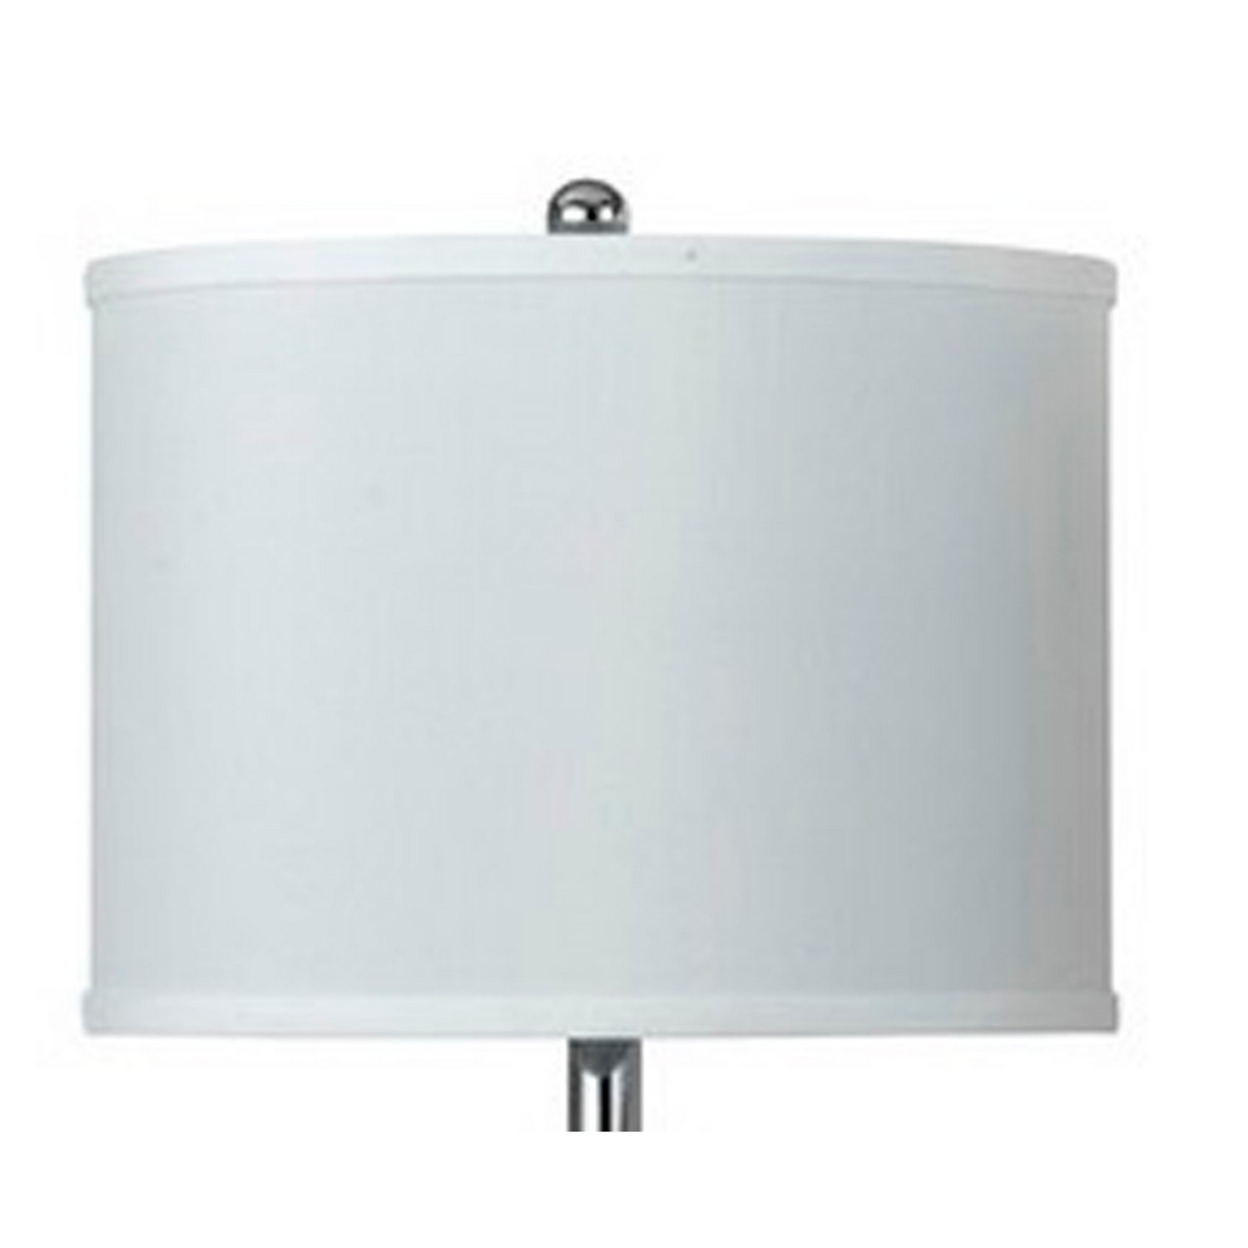 60W X 2 Wall Lamp With Round Shade And 3 Way Push Button Switch, Silver- Saltoro Sherpi